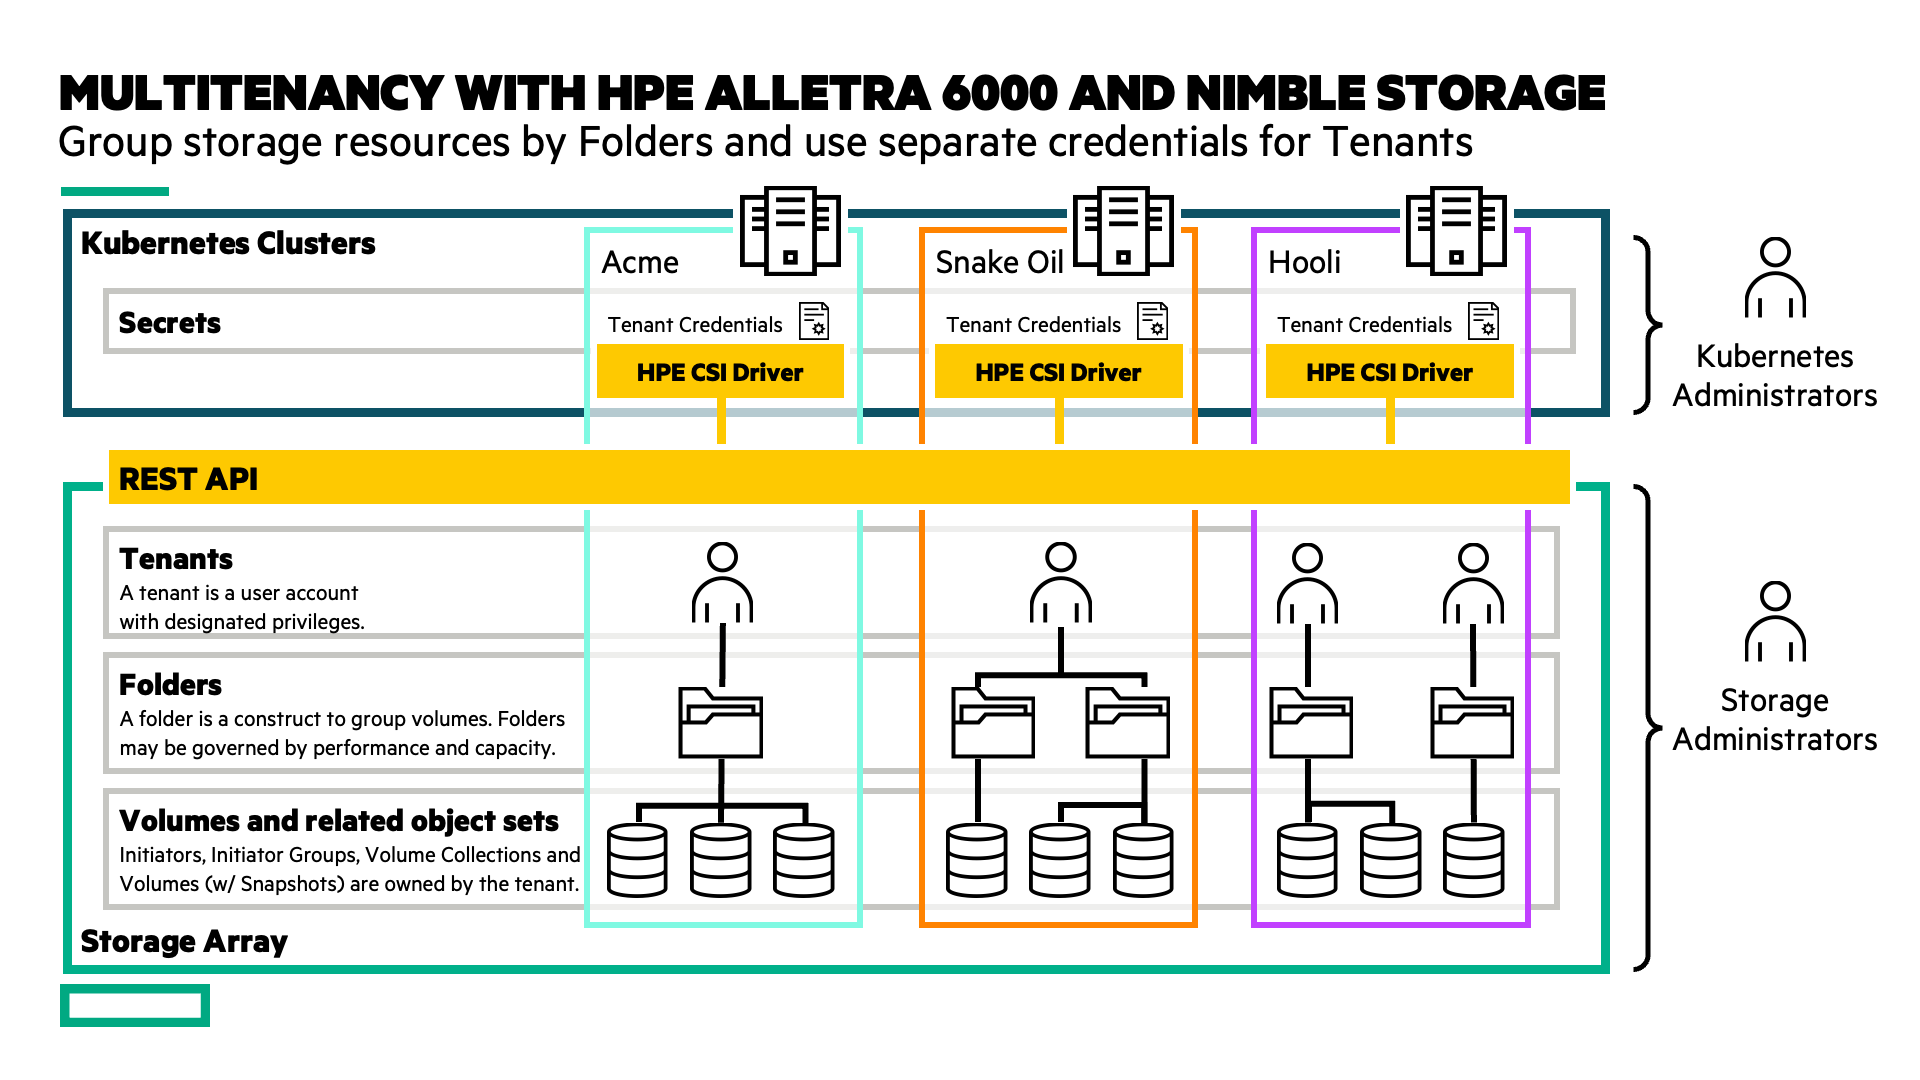 The tenant primitives of HPE Alletra 6000 and Nimble Storage